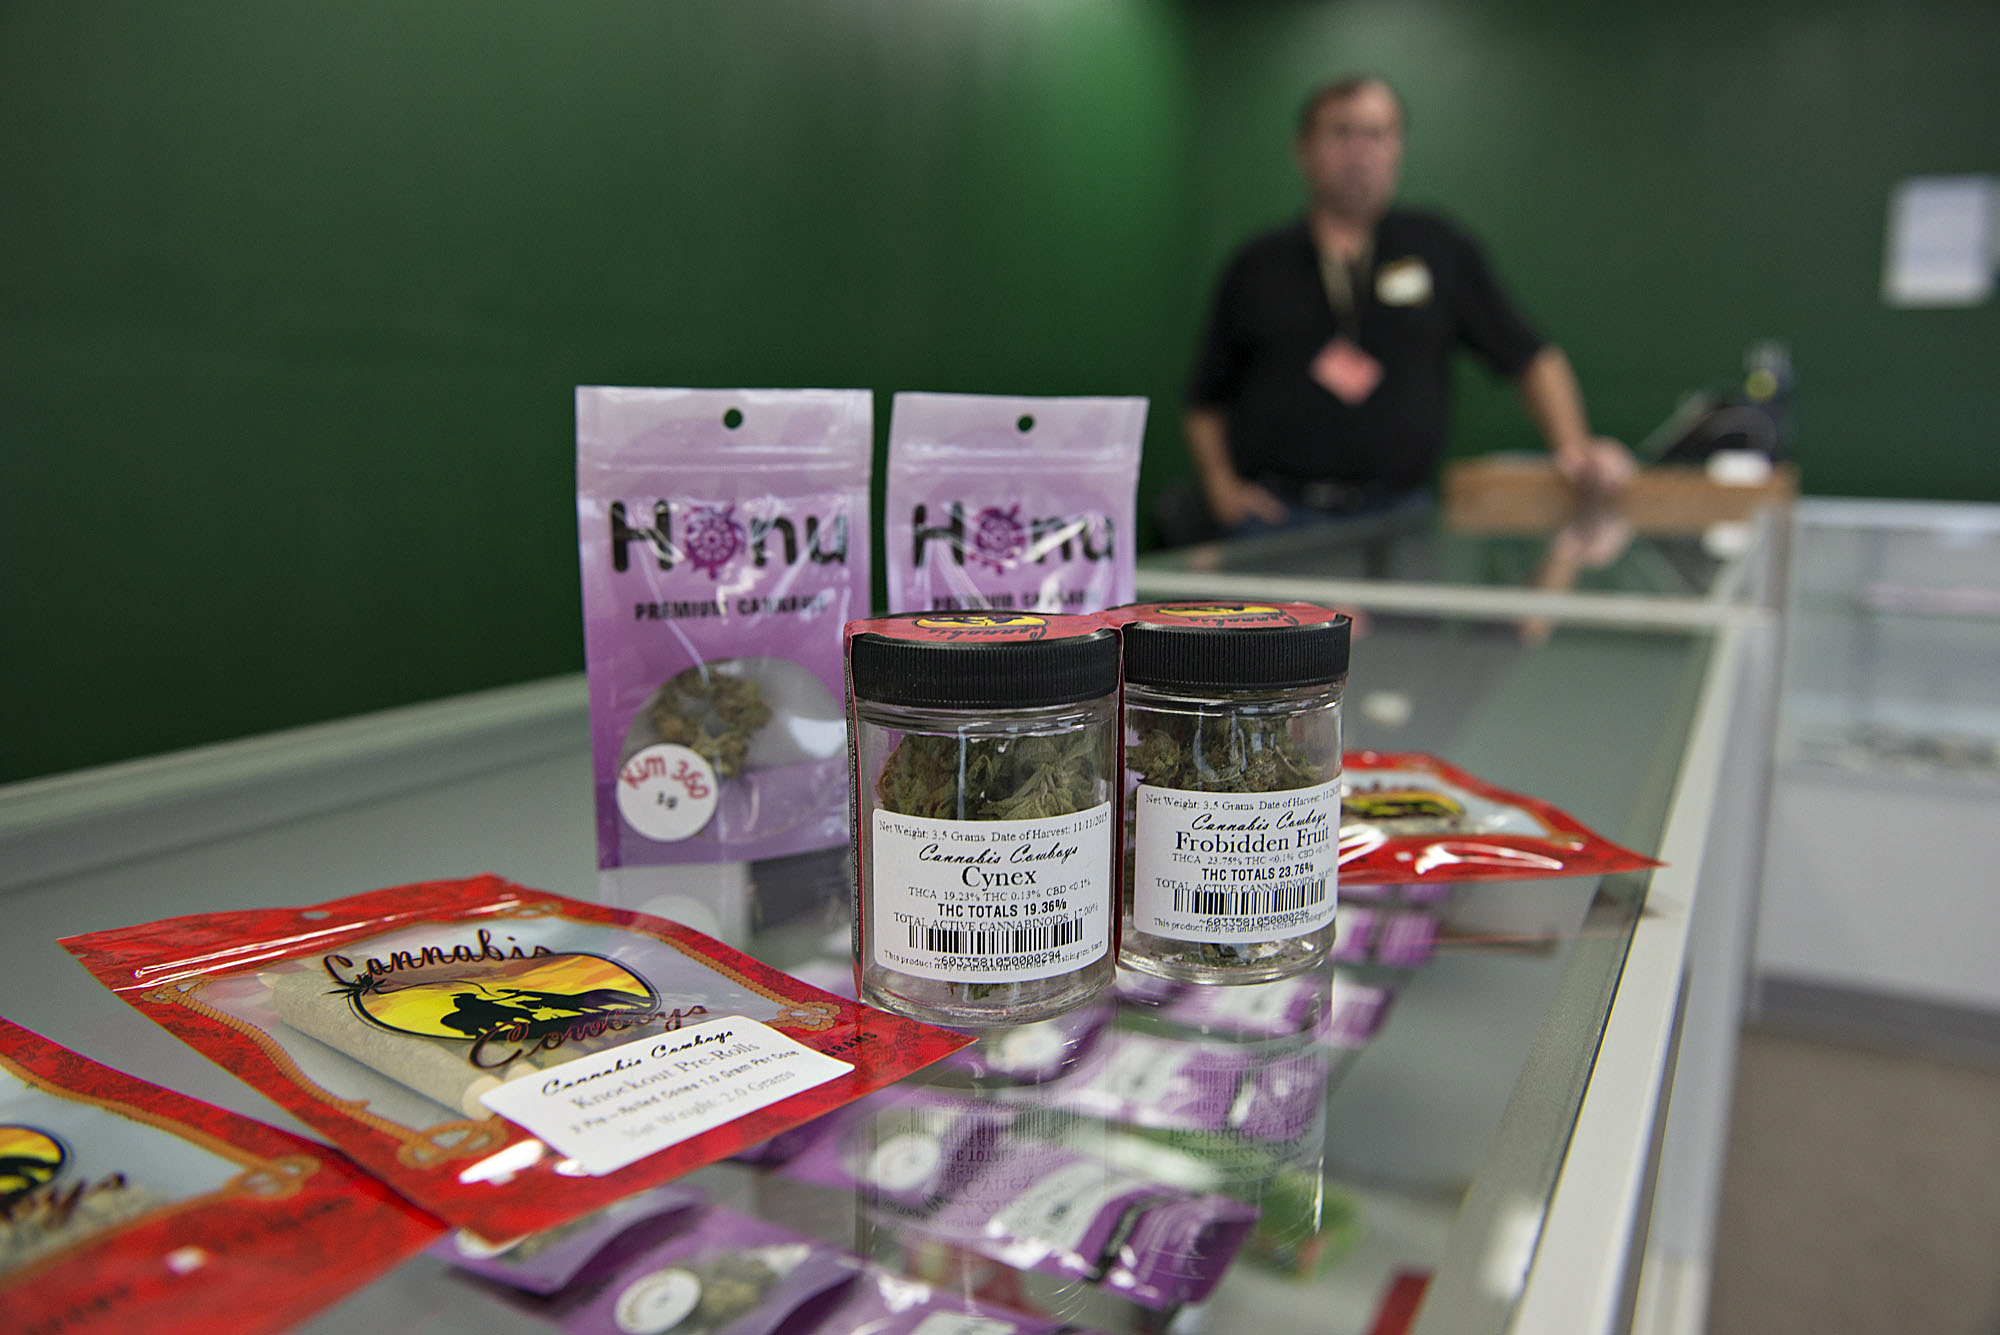 John Larson, owner of Sticky's Pot Shop, displays a variety of strains of marijuana at his shop Thursday afternoon. Larson sued Clark County over its moratorium against recreational marijuana businesses and lost in 2014. (Amanda Cowan/The Columbian)